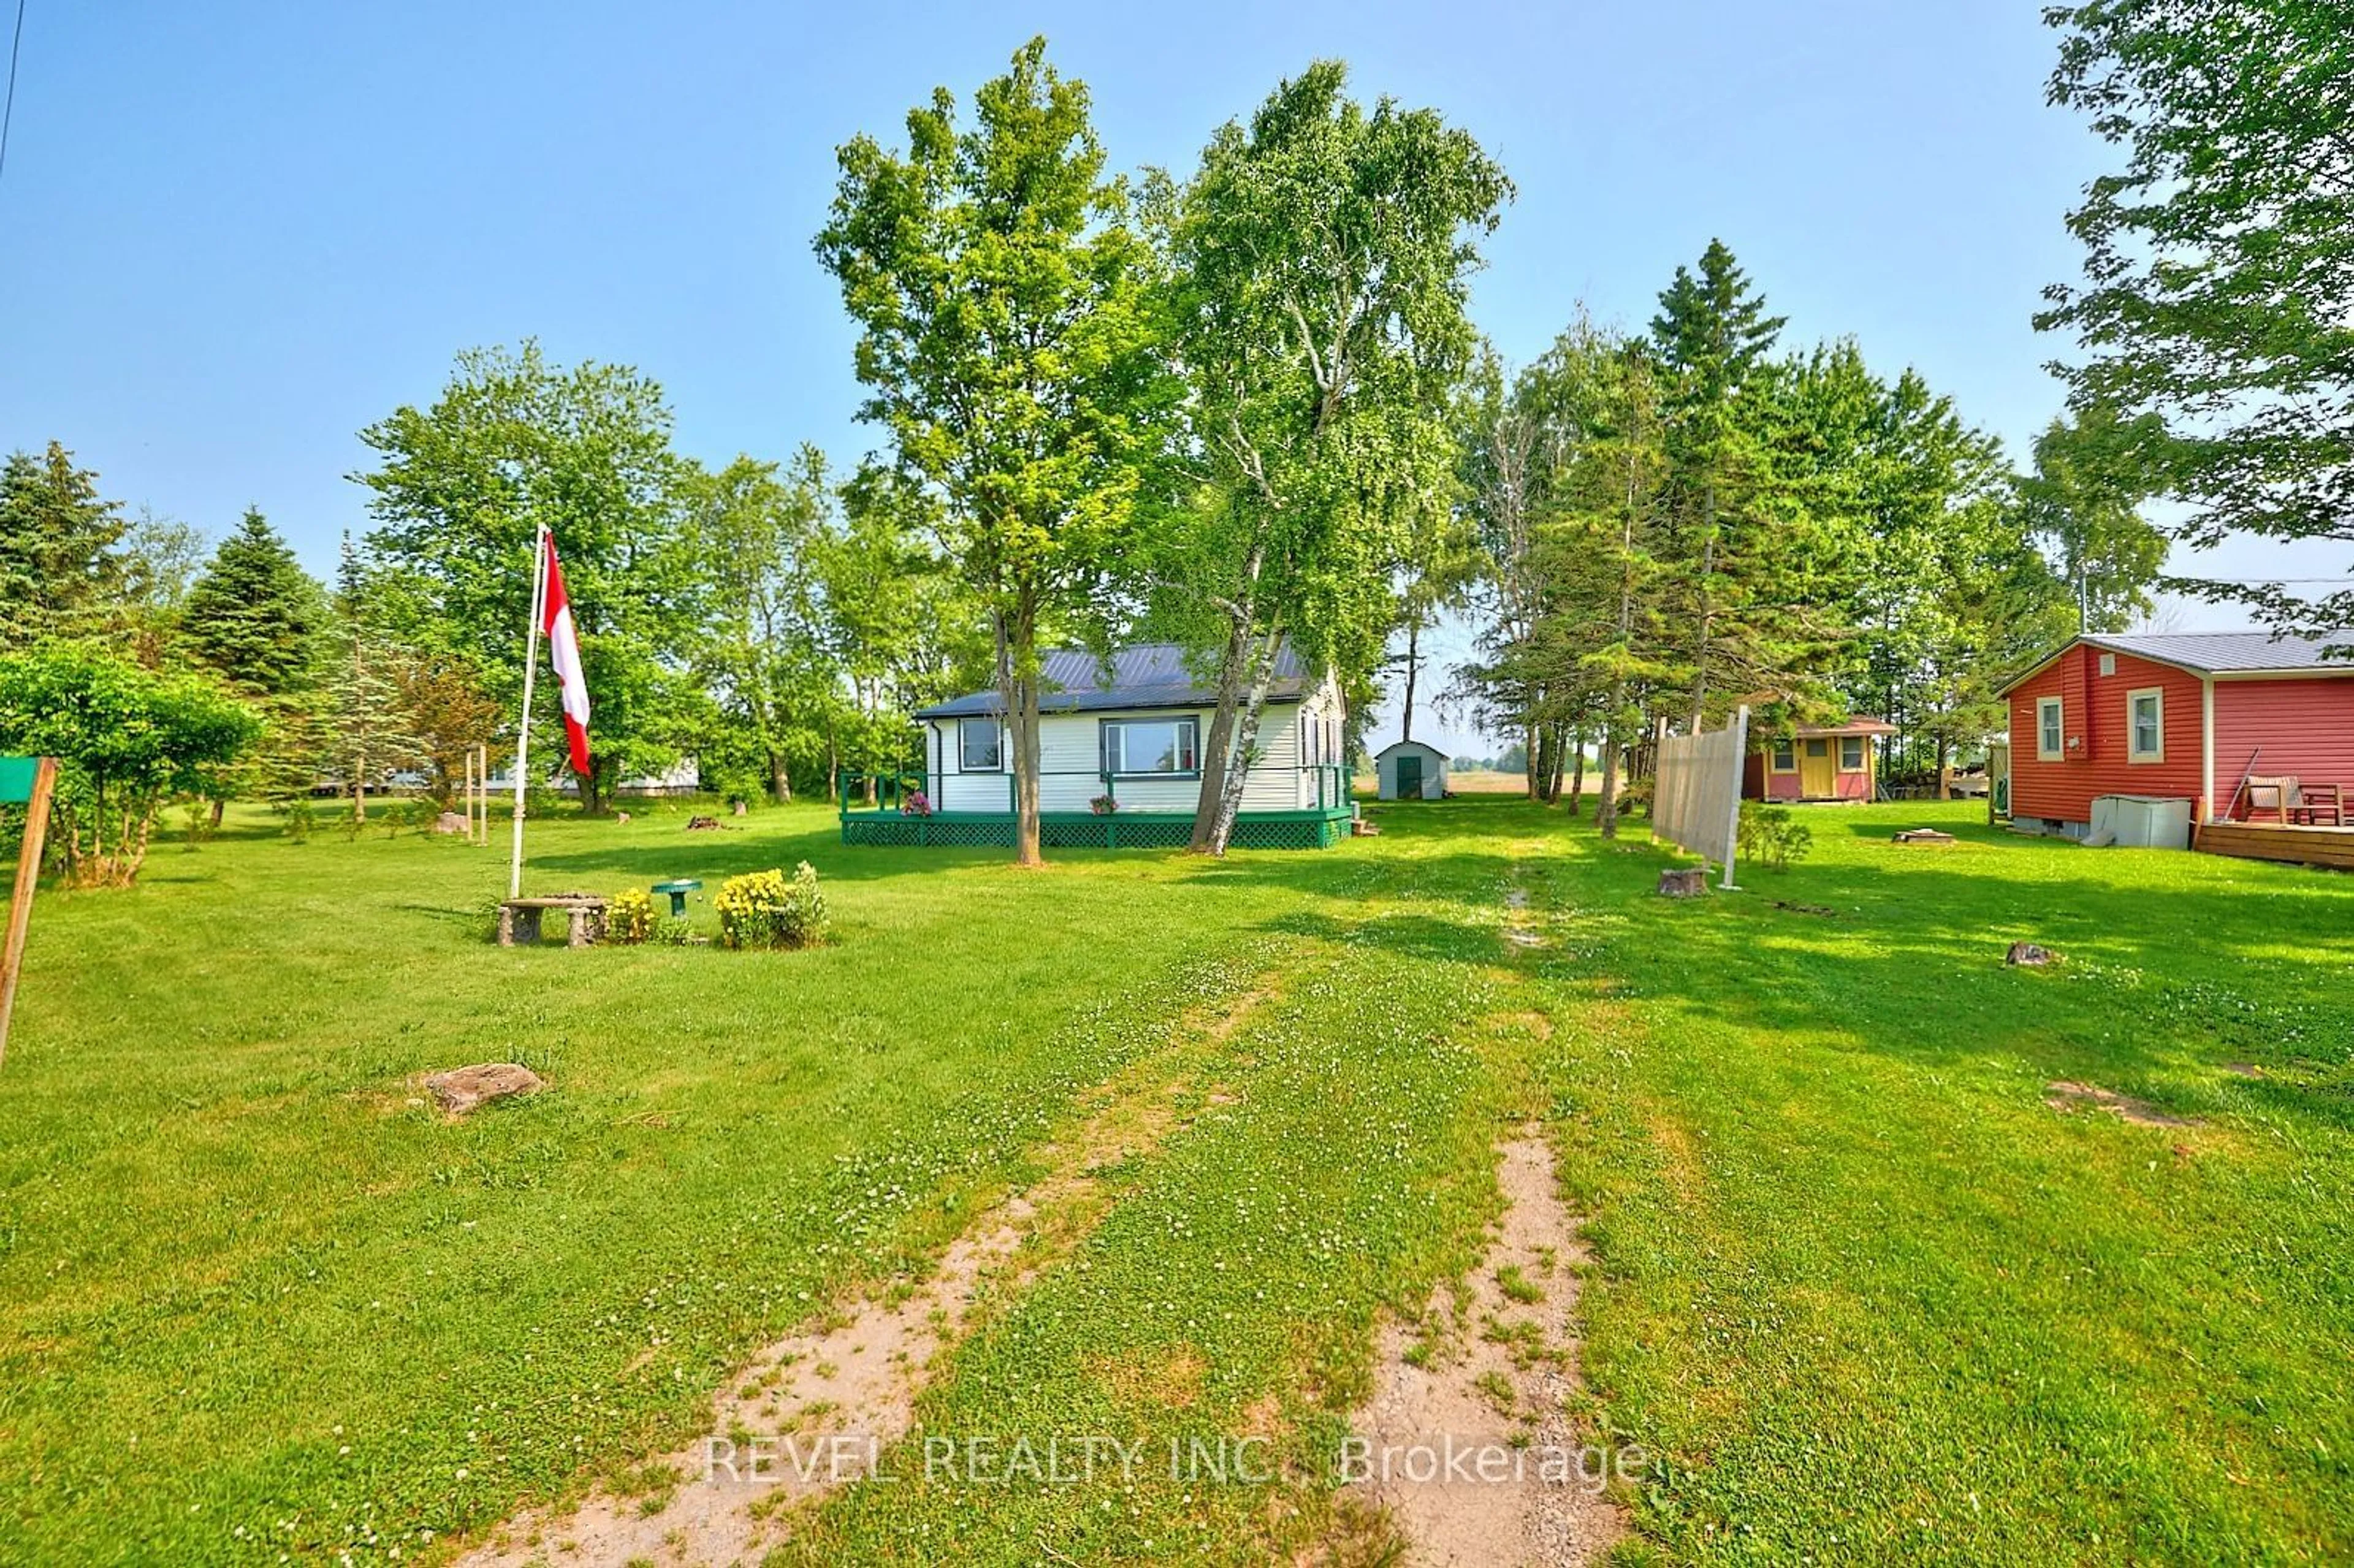 Cottage for 32 Erie Heights Line, Haldimand Ontario N0A 1K0